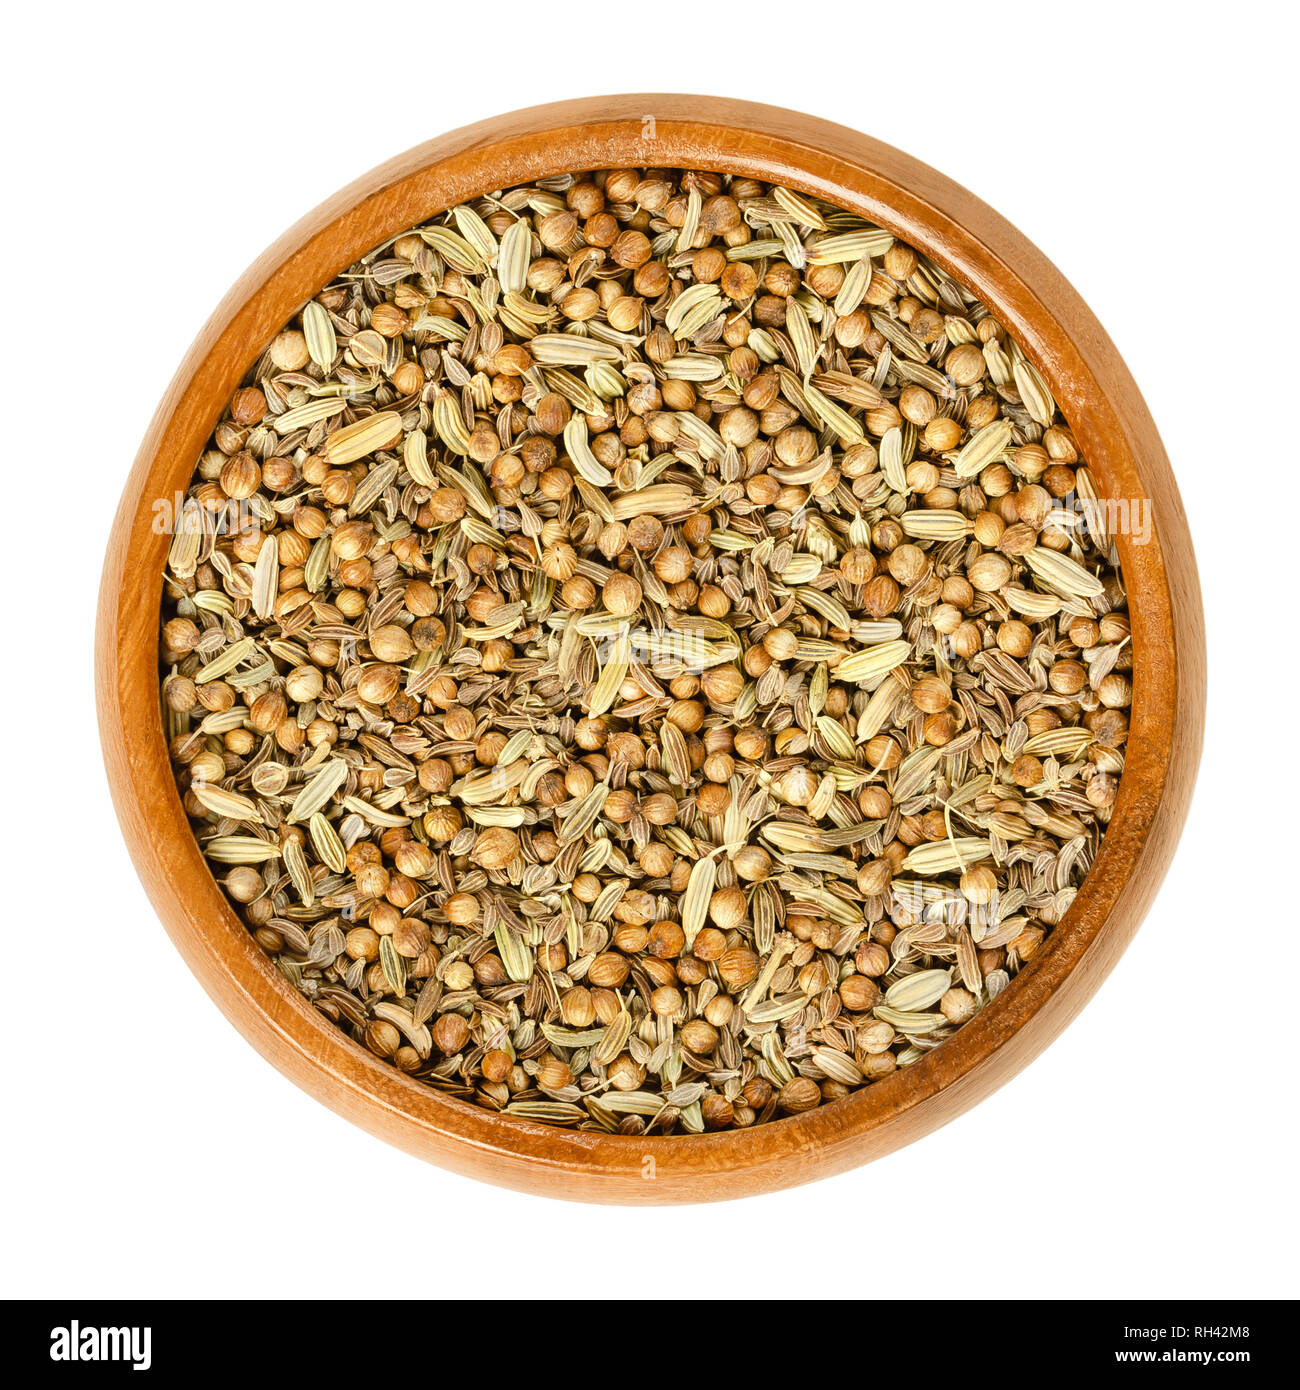 German bread spice mixture in wooden bowl. Mix of anise, fennel, coriander and caraway seeds. Used as digestive aid in bread recipes. Stock Photo